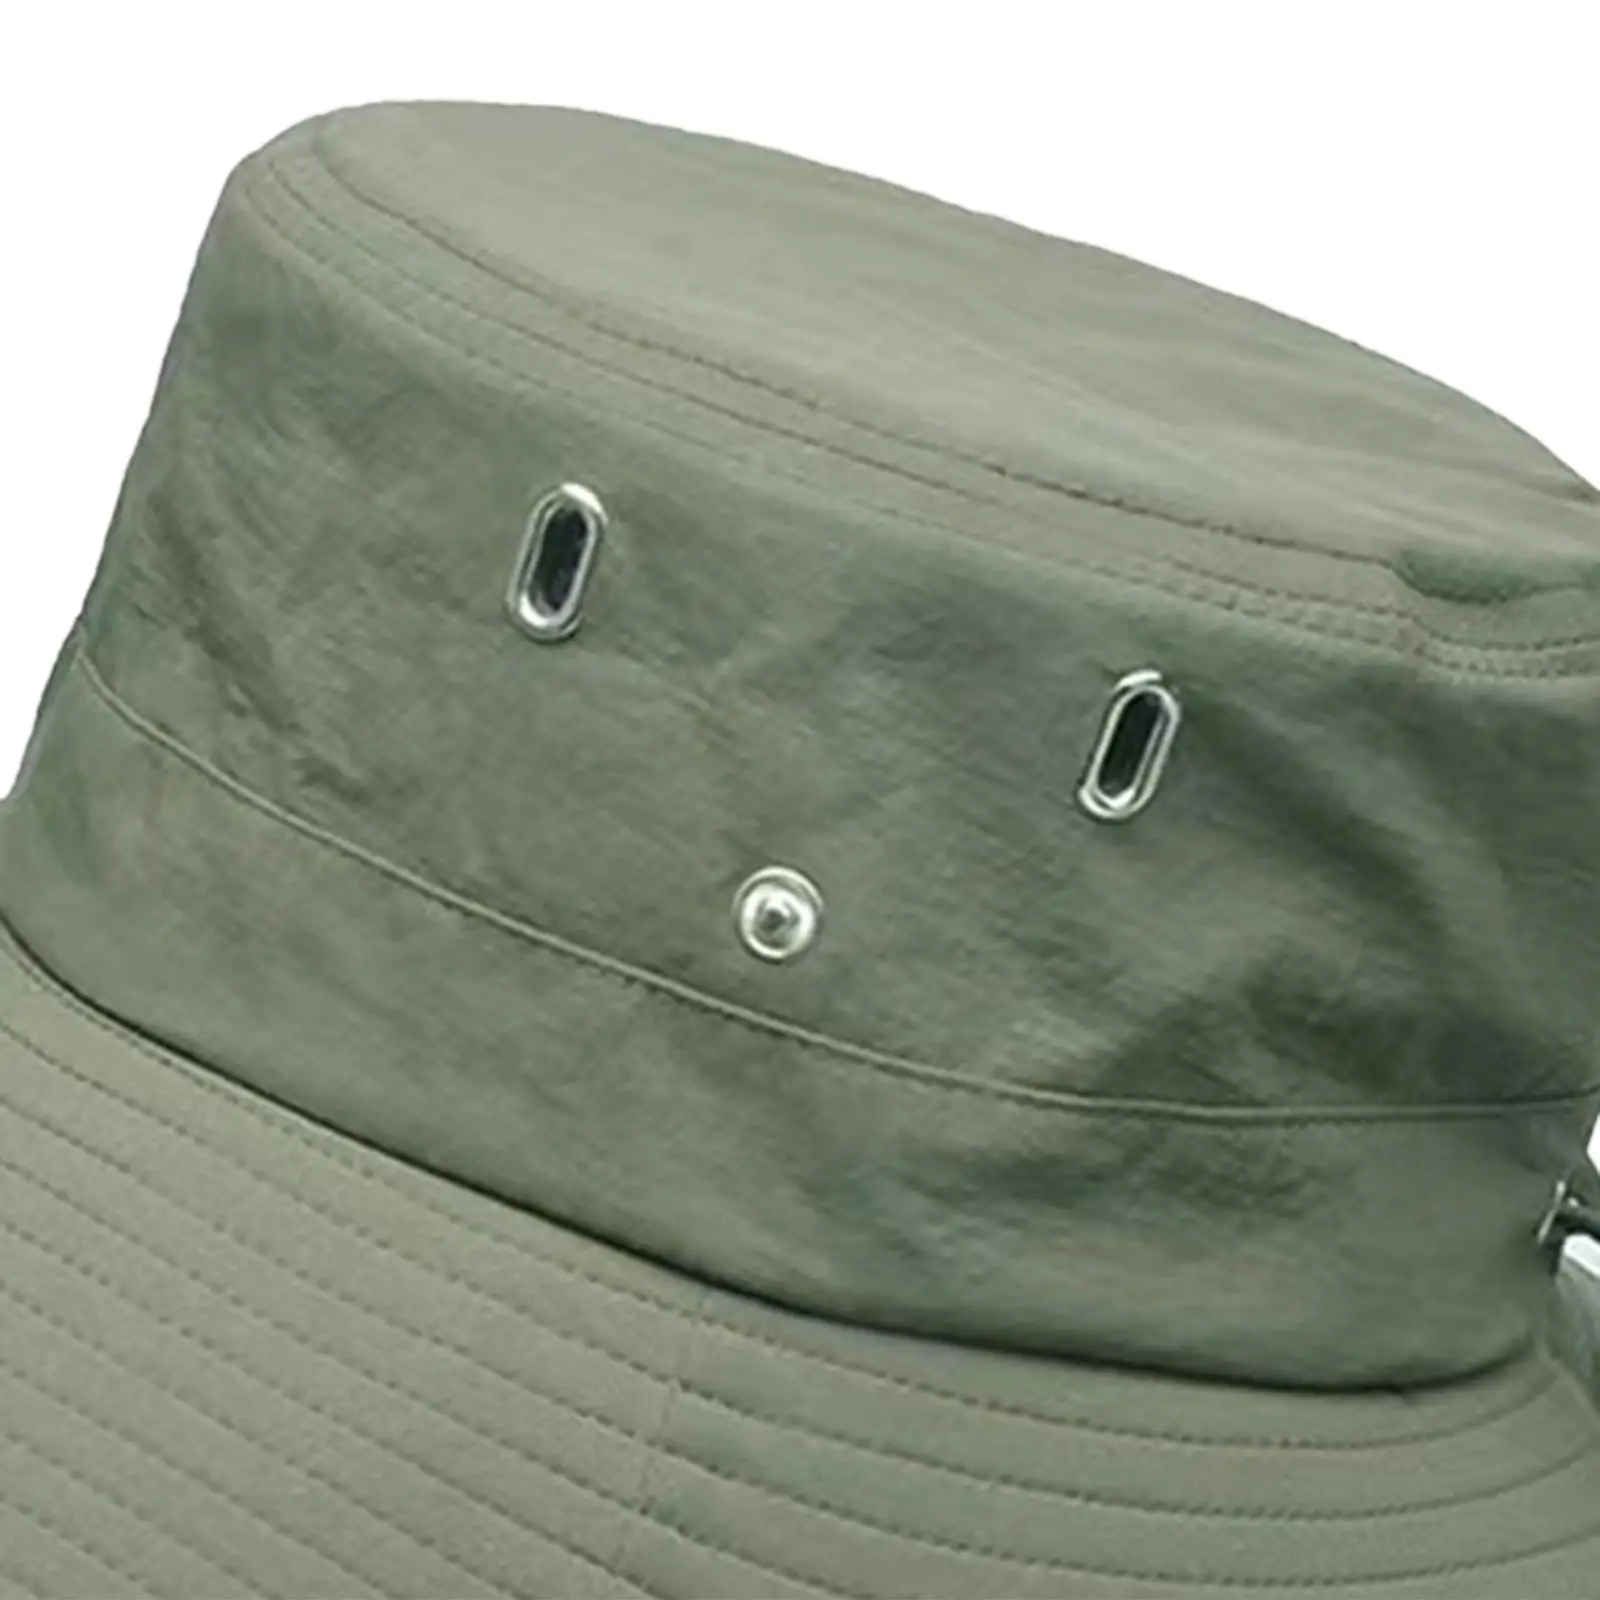 Sun Hat with Strap Foldable Bucket Hat with Strings for Golf Summer Vacation